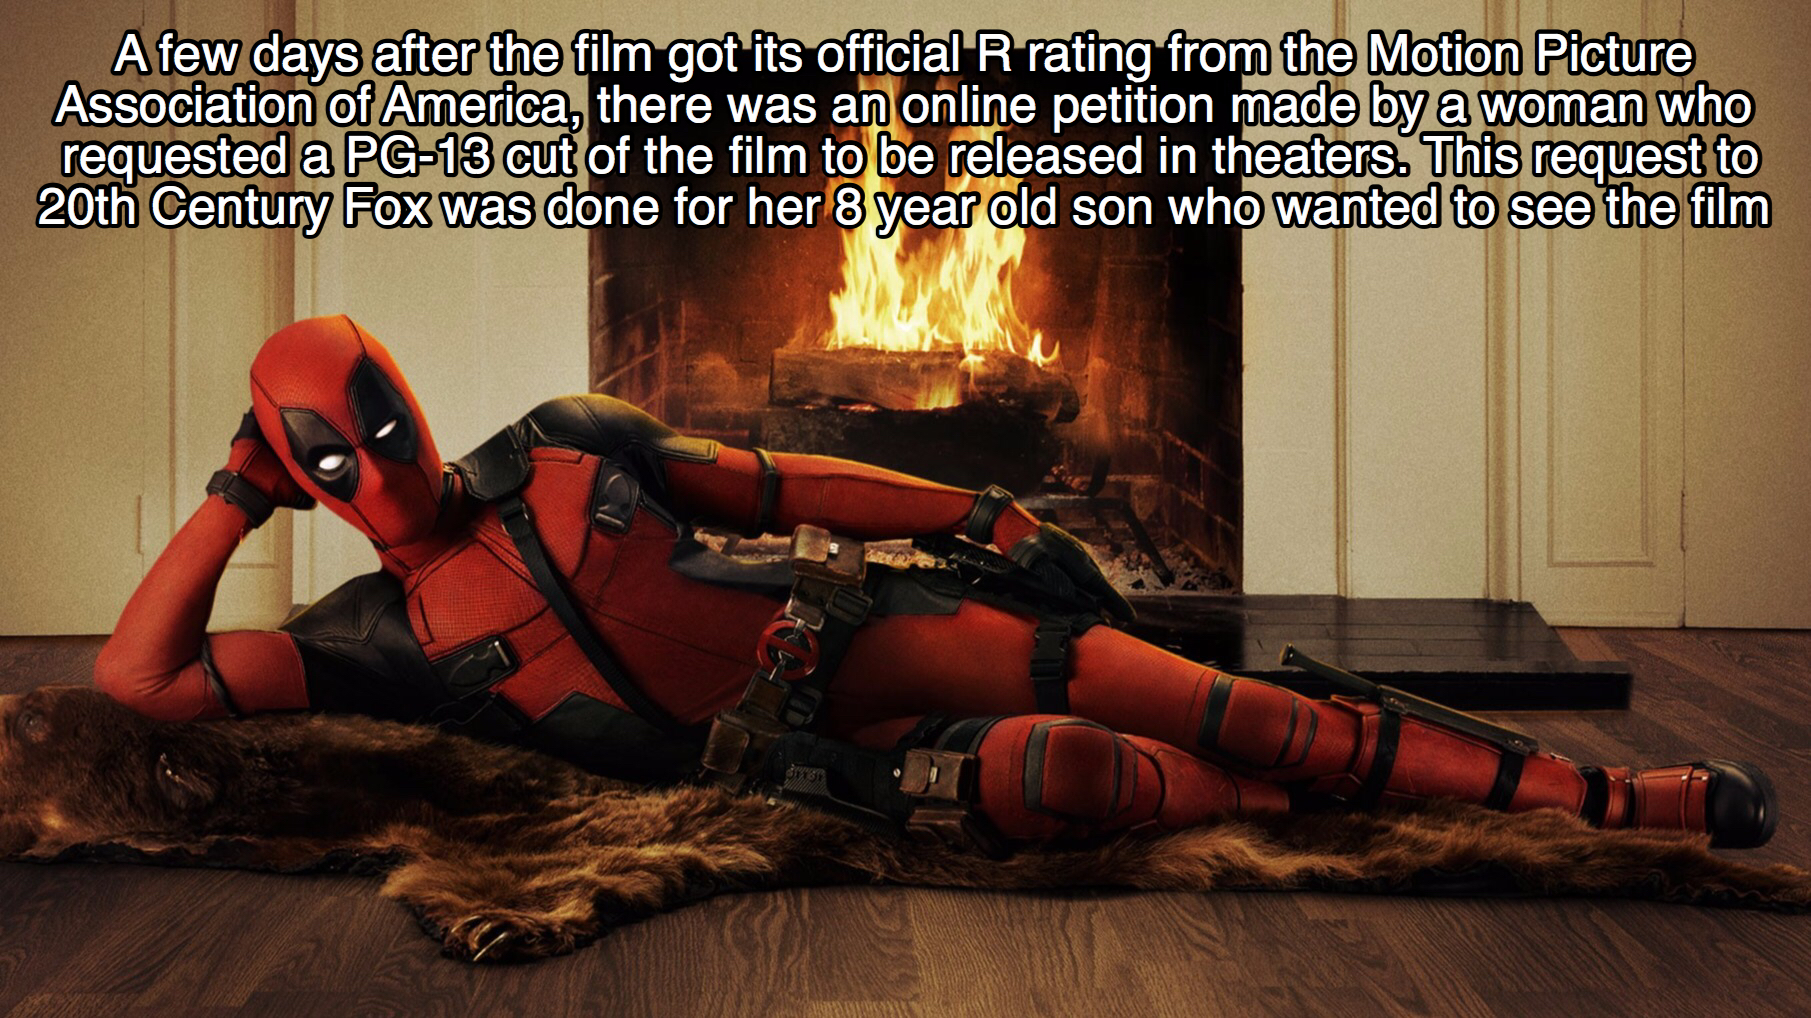 deadpool burt reynolds tribute - A few days after the film got its official R rating from the Motion Picture Association of America, there was an online petition made by a woman who requested a Pg13 cut of the film to be released in theaters. This request